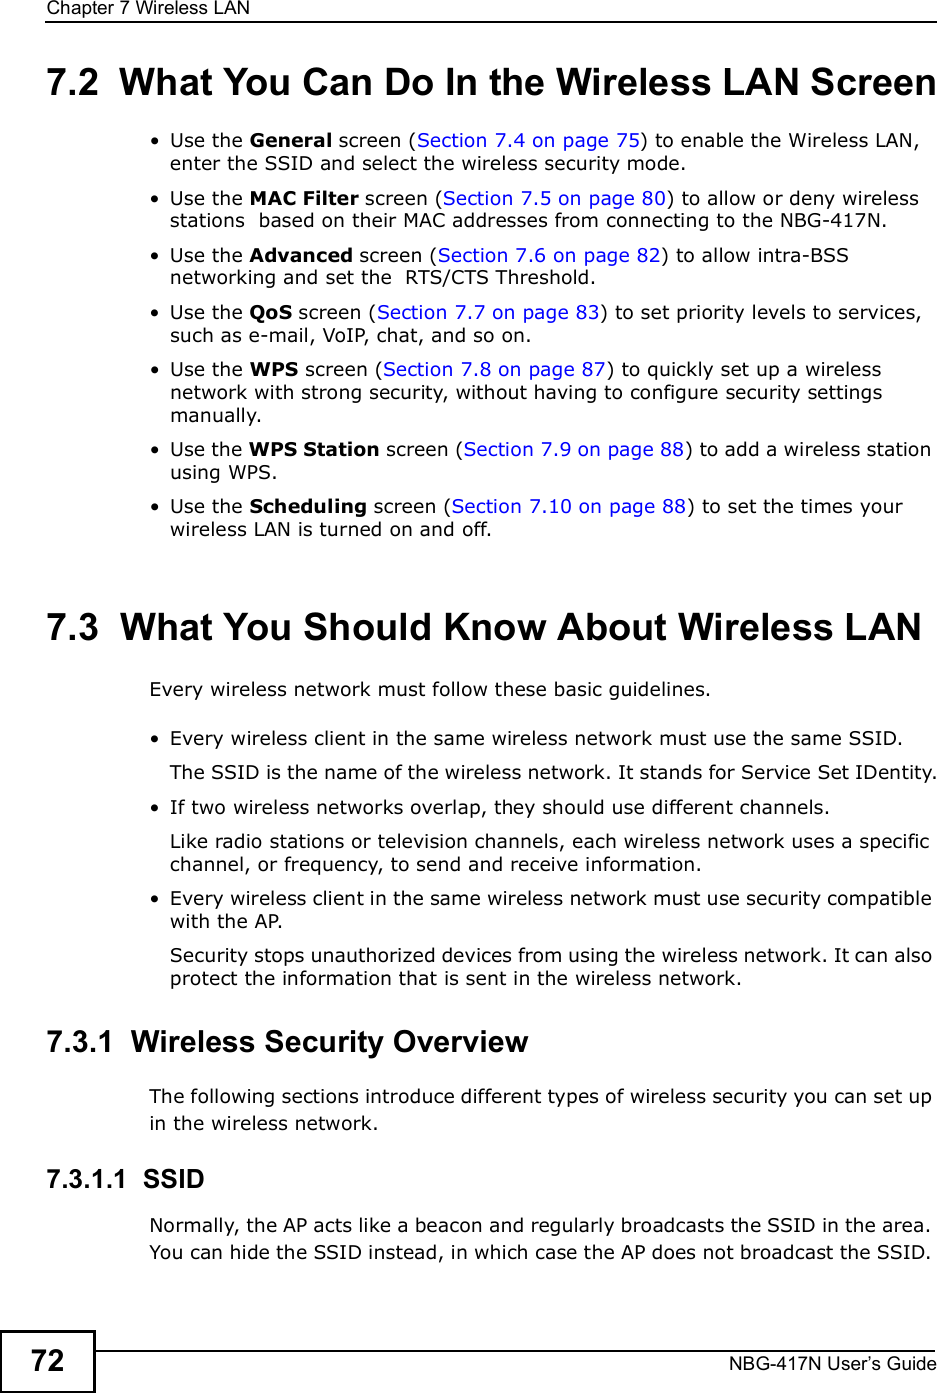 Chapter 7Wireless LANNBG-417N User s Guide727.2  What You Can Do In the Wireless LAN Screen Use the General screen (Section 7.4 on page 75) to enable the Wireless LAN, enter the SSID and select the wireless security mode. Use the MAC Filter screen (Section 7.5 on page 80) to allow or deny wireless stations  based on their MAC addresses from connecting to the NBG-417N. Use the Advanced screen (Section 7.6 on page 82) to allow intra-BSS networking and set the  RTS/CTS Threshold. Use the QoS screen (Section 7.7 on page 83) to set priority levels to services, such as e-mail, VoIP, chat, and so on. Use the WPS screen (Section 7.8 on page 87) to quickly set up a wireless network with strong security, without having to configure security settings manually. Use the WPS Station screen (Section 7.9 on page 88) to add a wireless station using WPS.  Use the Scheduling screen (Section 7.10 on page 88) to set the times your wireless LAN is turned on and off.7.3  What You Should Know About Wireless LANEvery wireless network must follow these basic guidelines. Every wireless client in the same wireless network must use the same SSID.The SSID is the name of the wireless network. It stands for Service Set IDentity. If two wireless networks overlap, they should use different channels.Like radio stations or television channels, each wireless network uses a specific channel, or frequency, to send and receive information. Every wireless client in the same wireless network must use security compatible with the AP.Security stops unauthorized devices from using the wireless network. It can also protect the information that is sent in the wireless network.7.3.1  Wireless Security OverviewThe following sections introduce different types of wireless security you can set up in the wireless network.7.3.1.1  SSIDNormally, the AP acts like a beacon and regularly broadcasts the SSID in the area. You can hide the SSID instead, in which case the AP does not broadcast the SSID. 